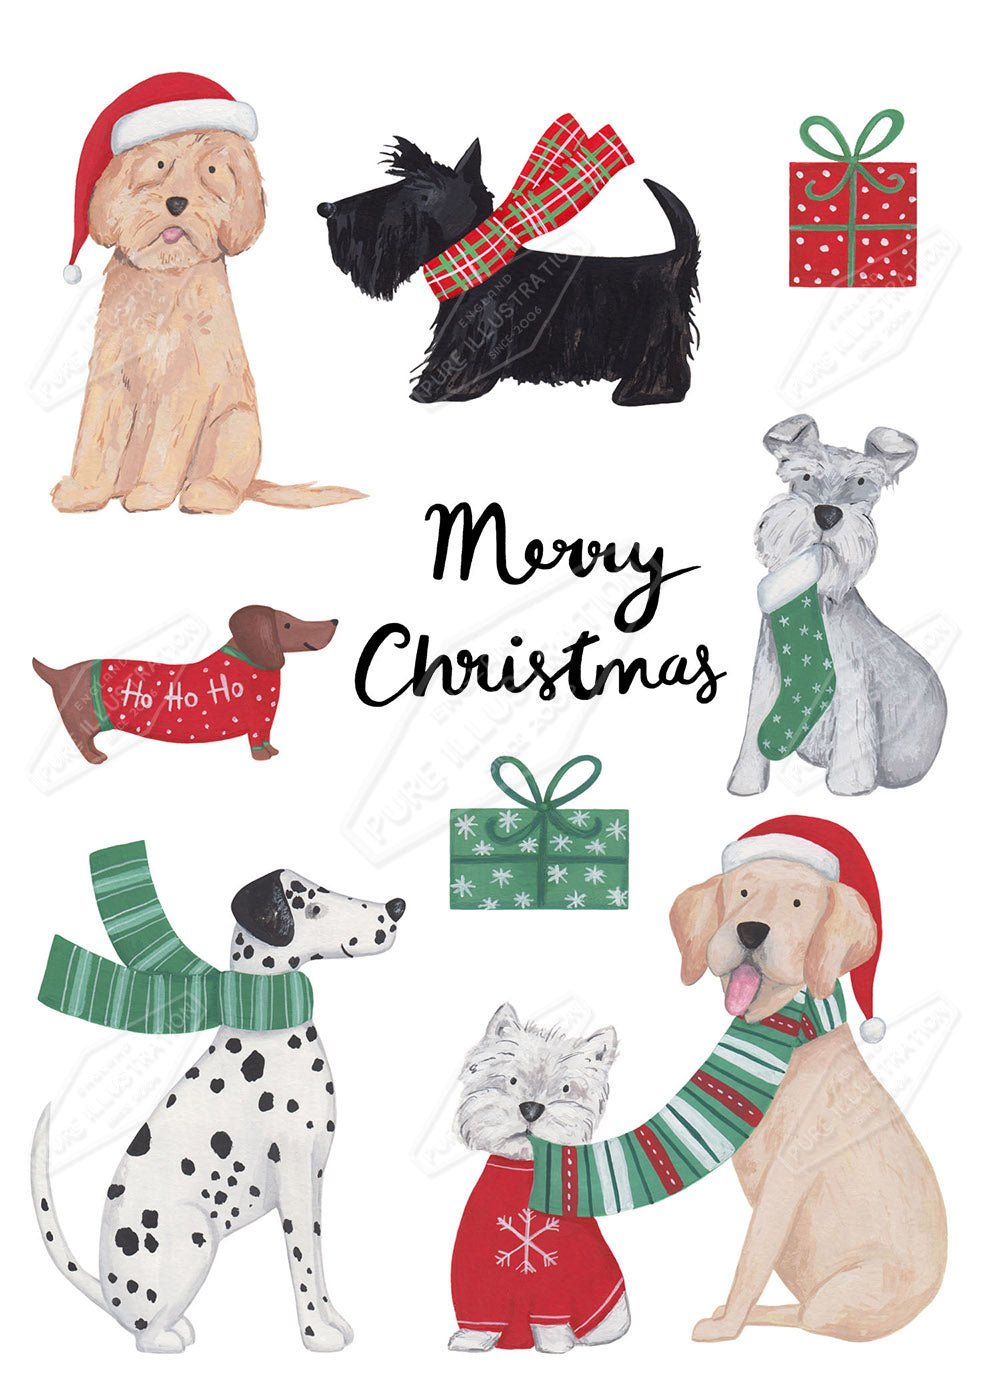 00034175AAI - Christmas Dogs - Greeting Card Design - Pure Art Licensing Agents